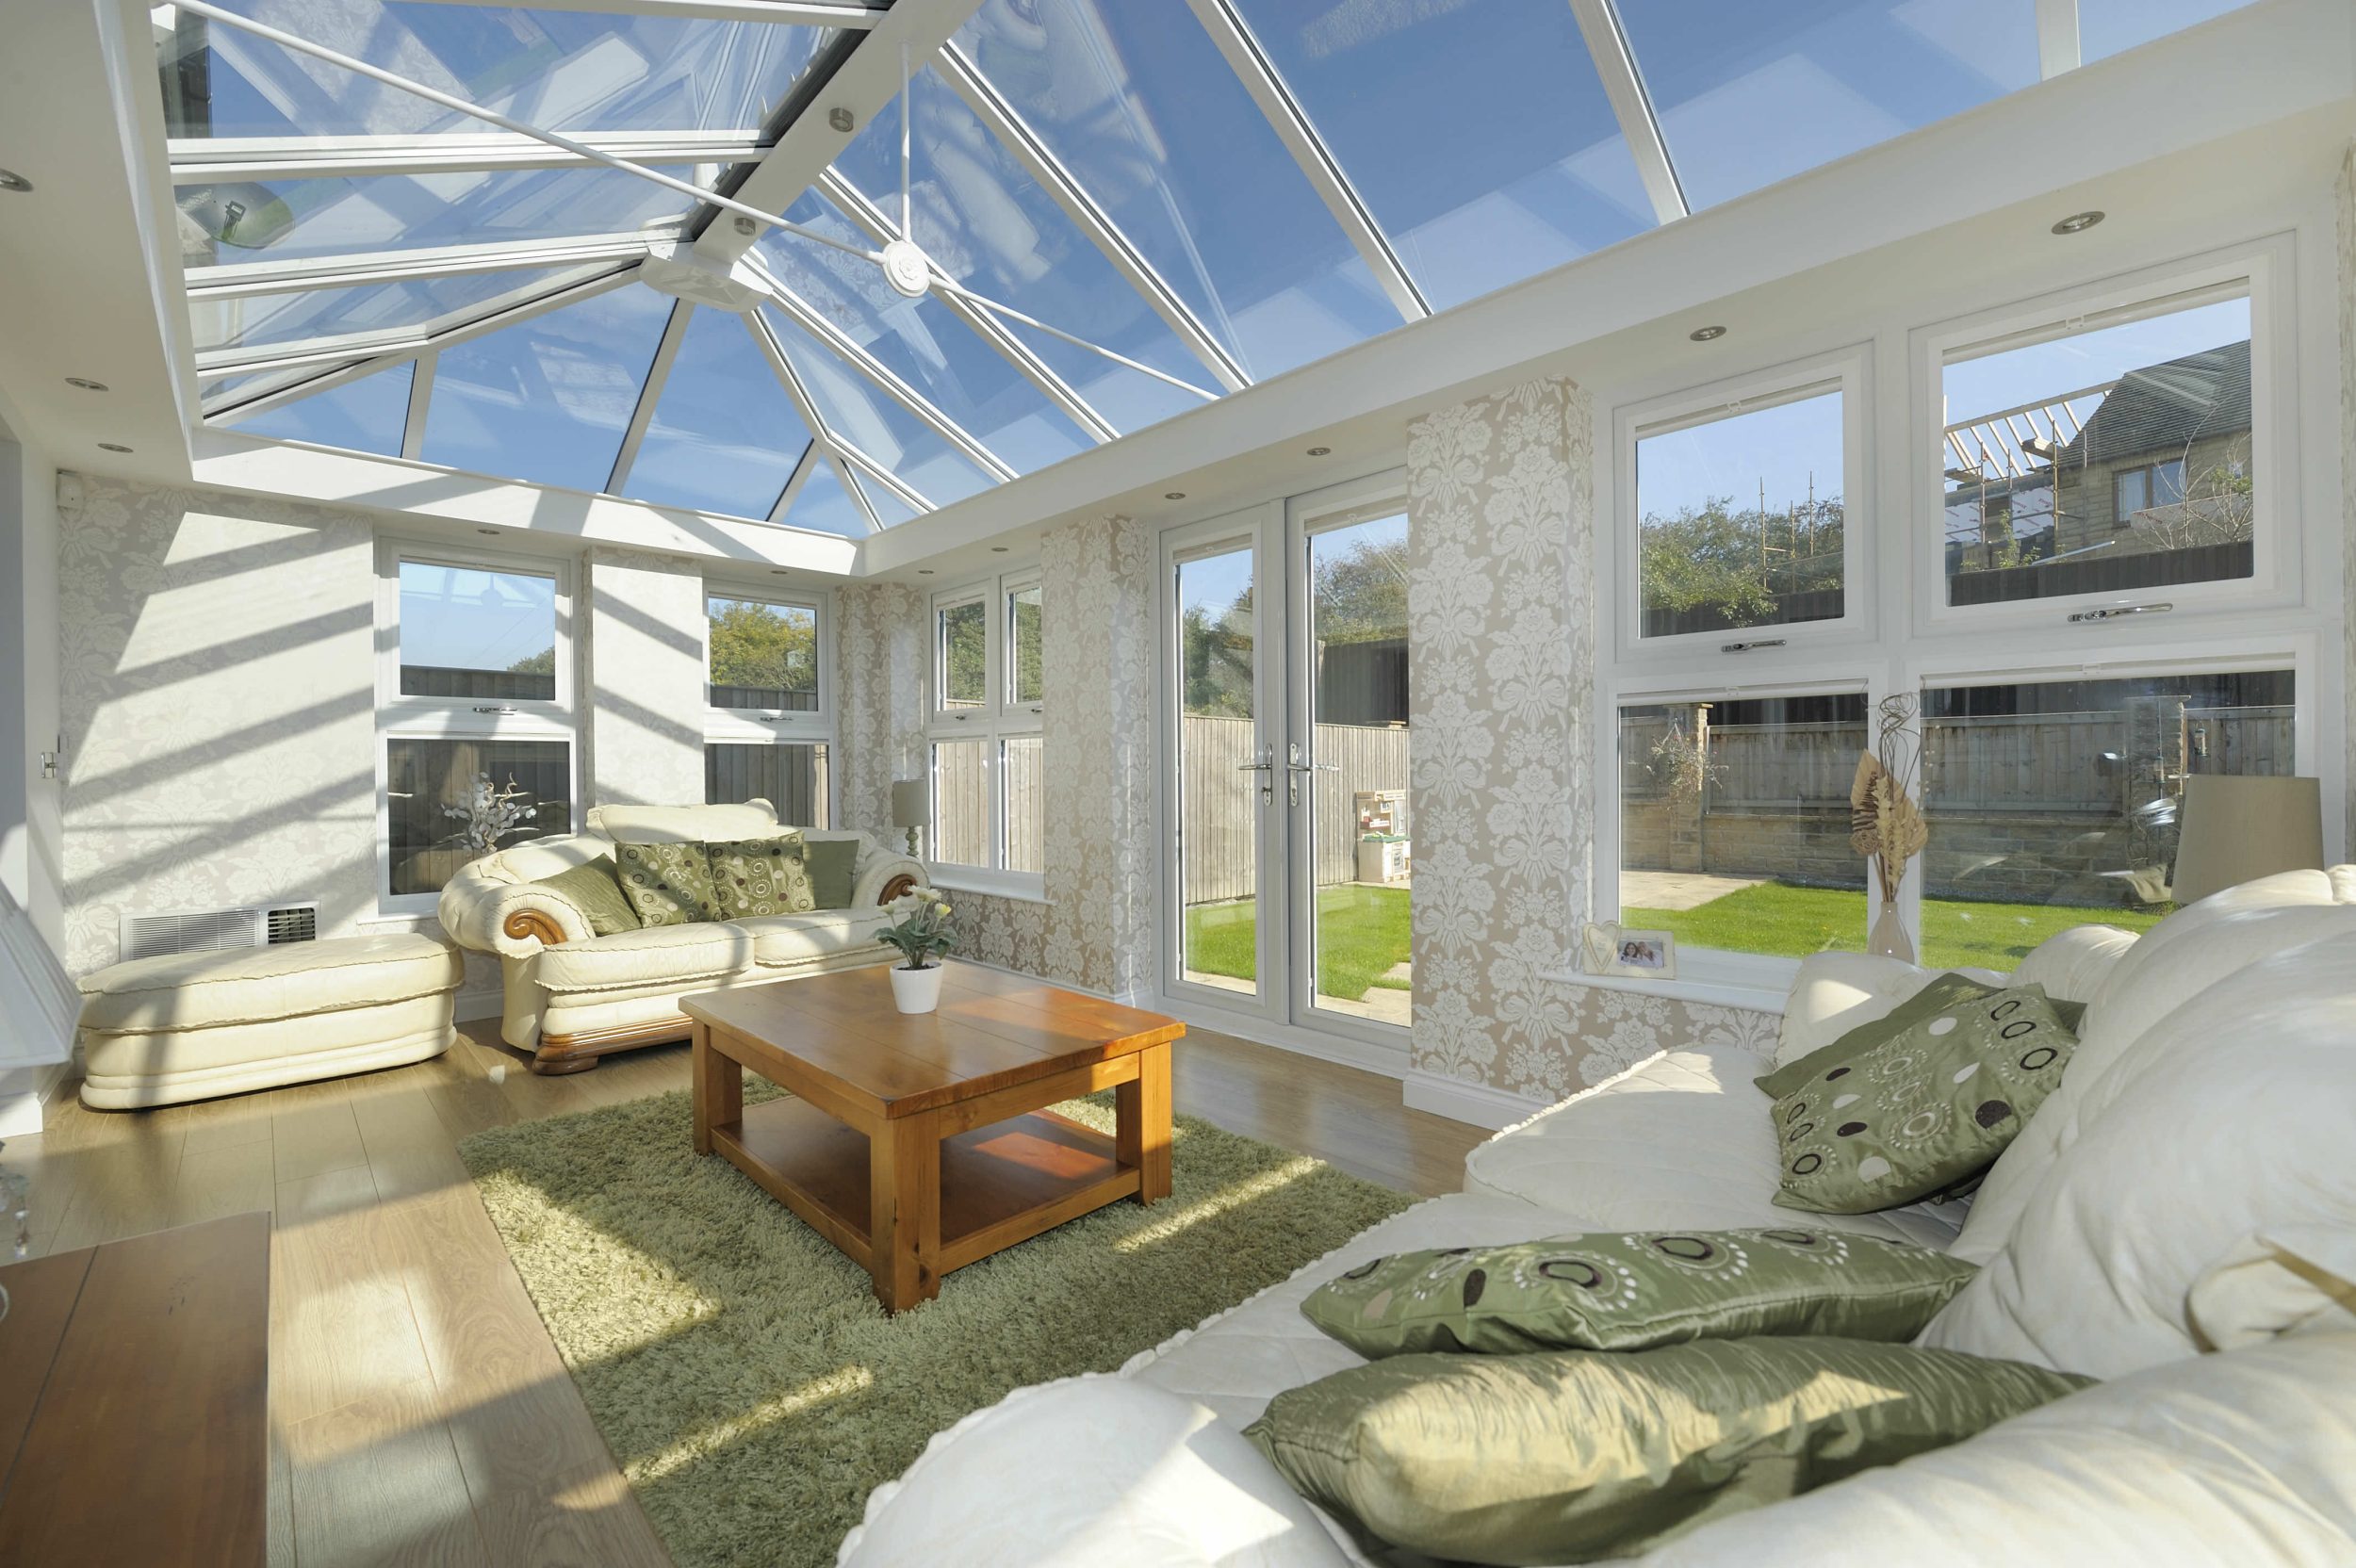 Glass roofed conservatory with sofas and wooden table in the centre